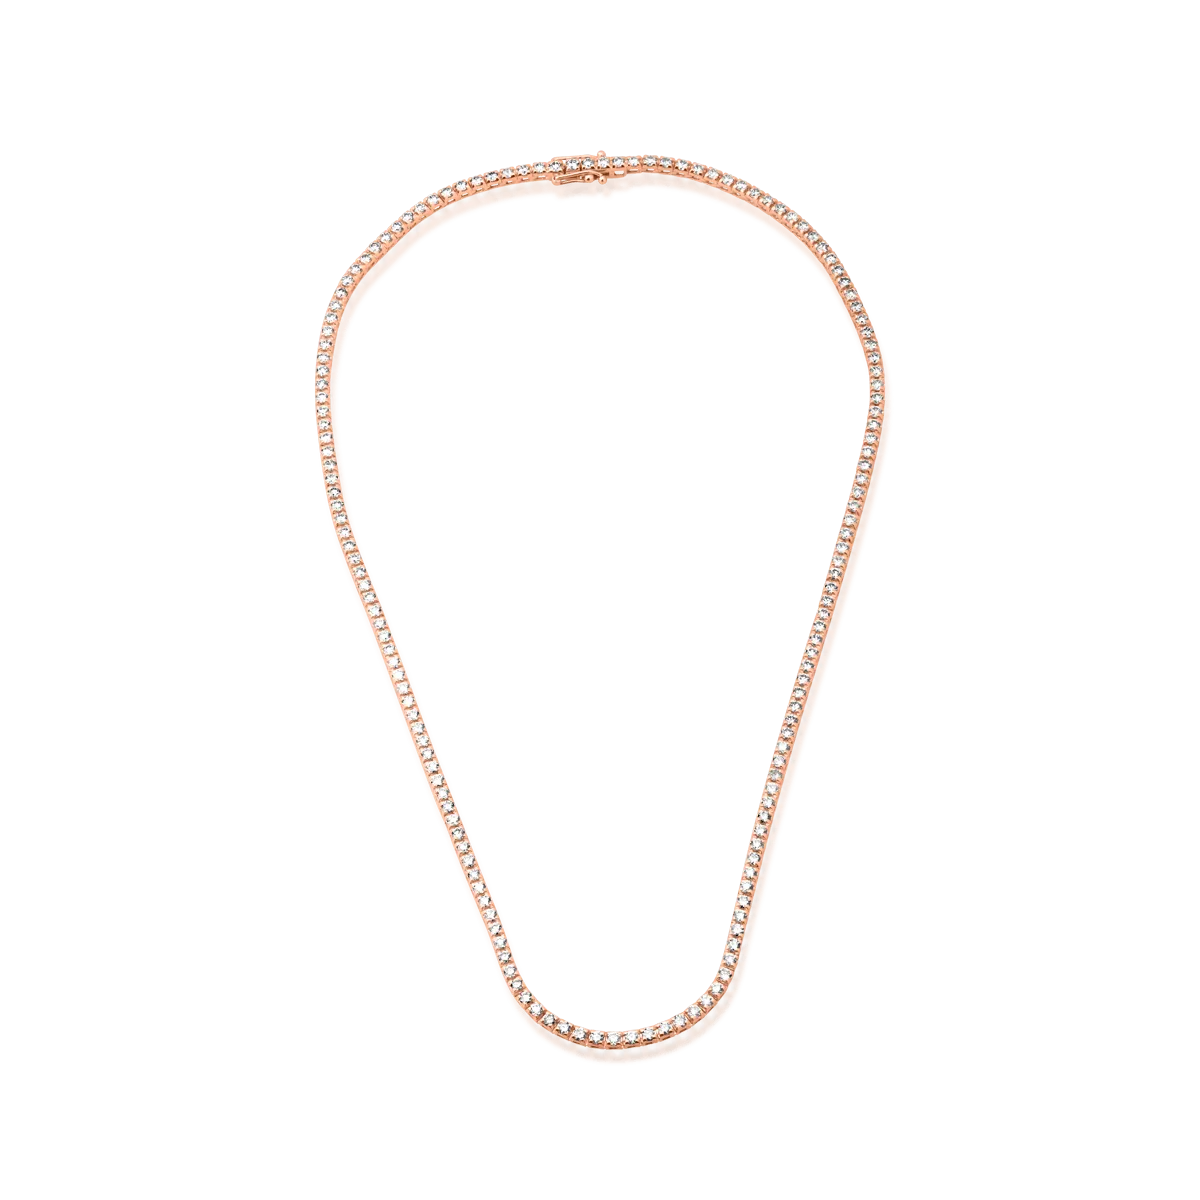 18K rose gold tennis necklace with 4.5ct brown diamonds